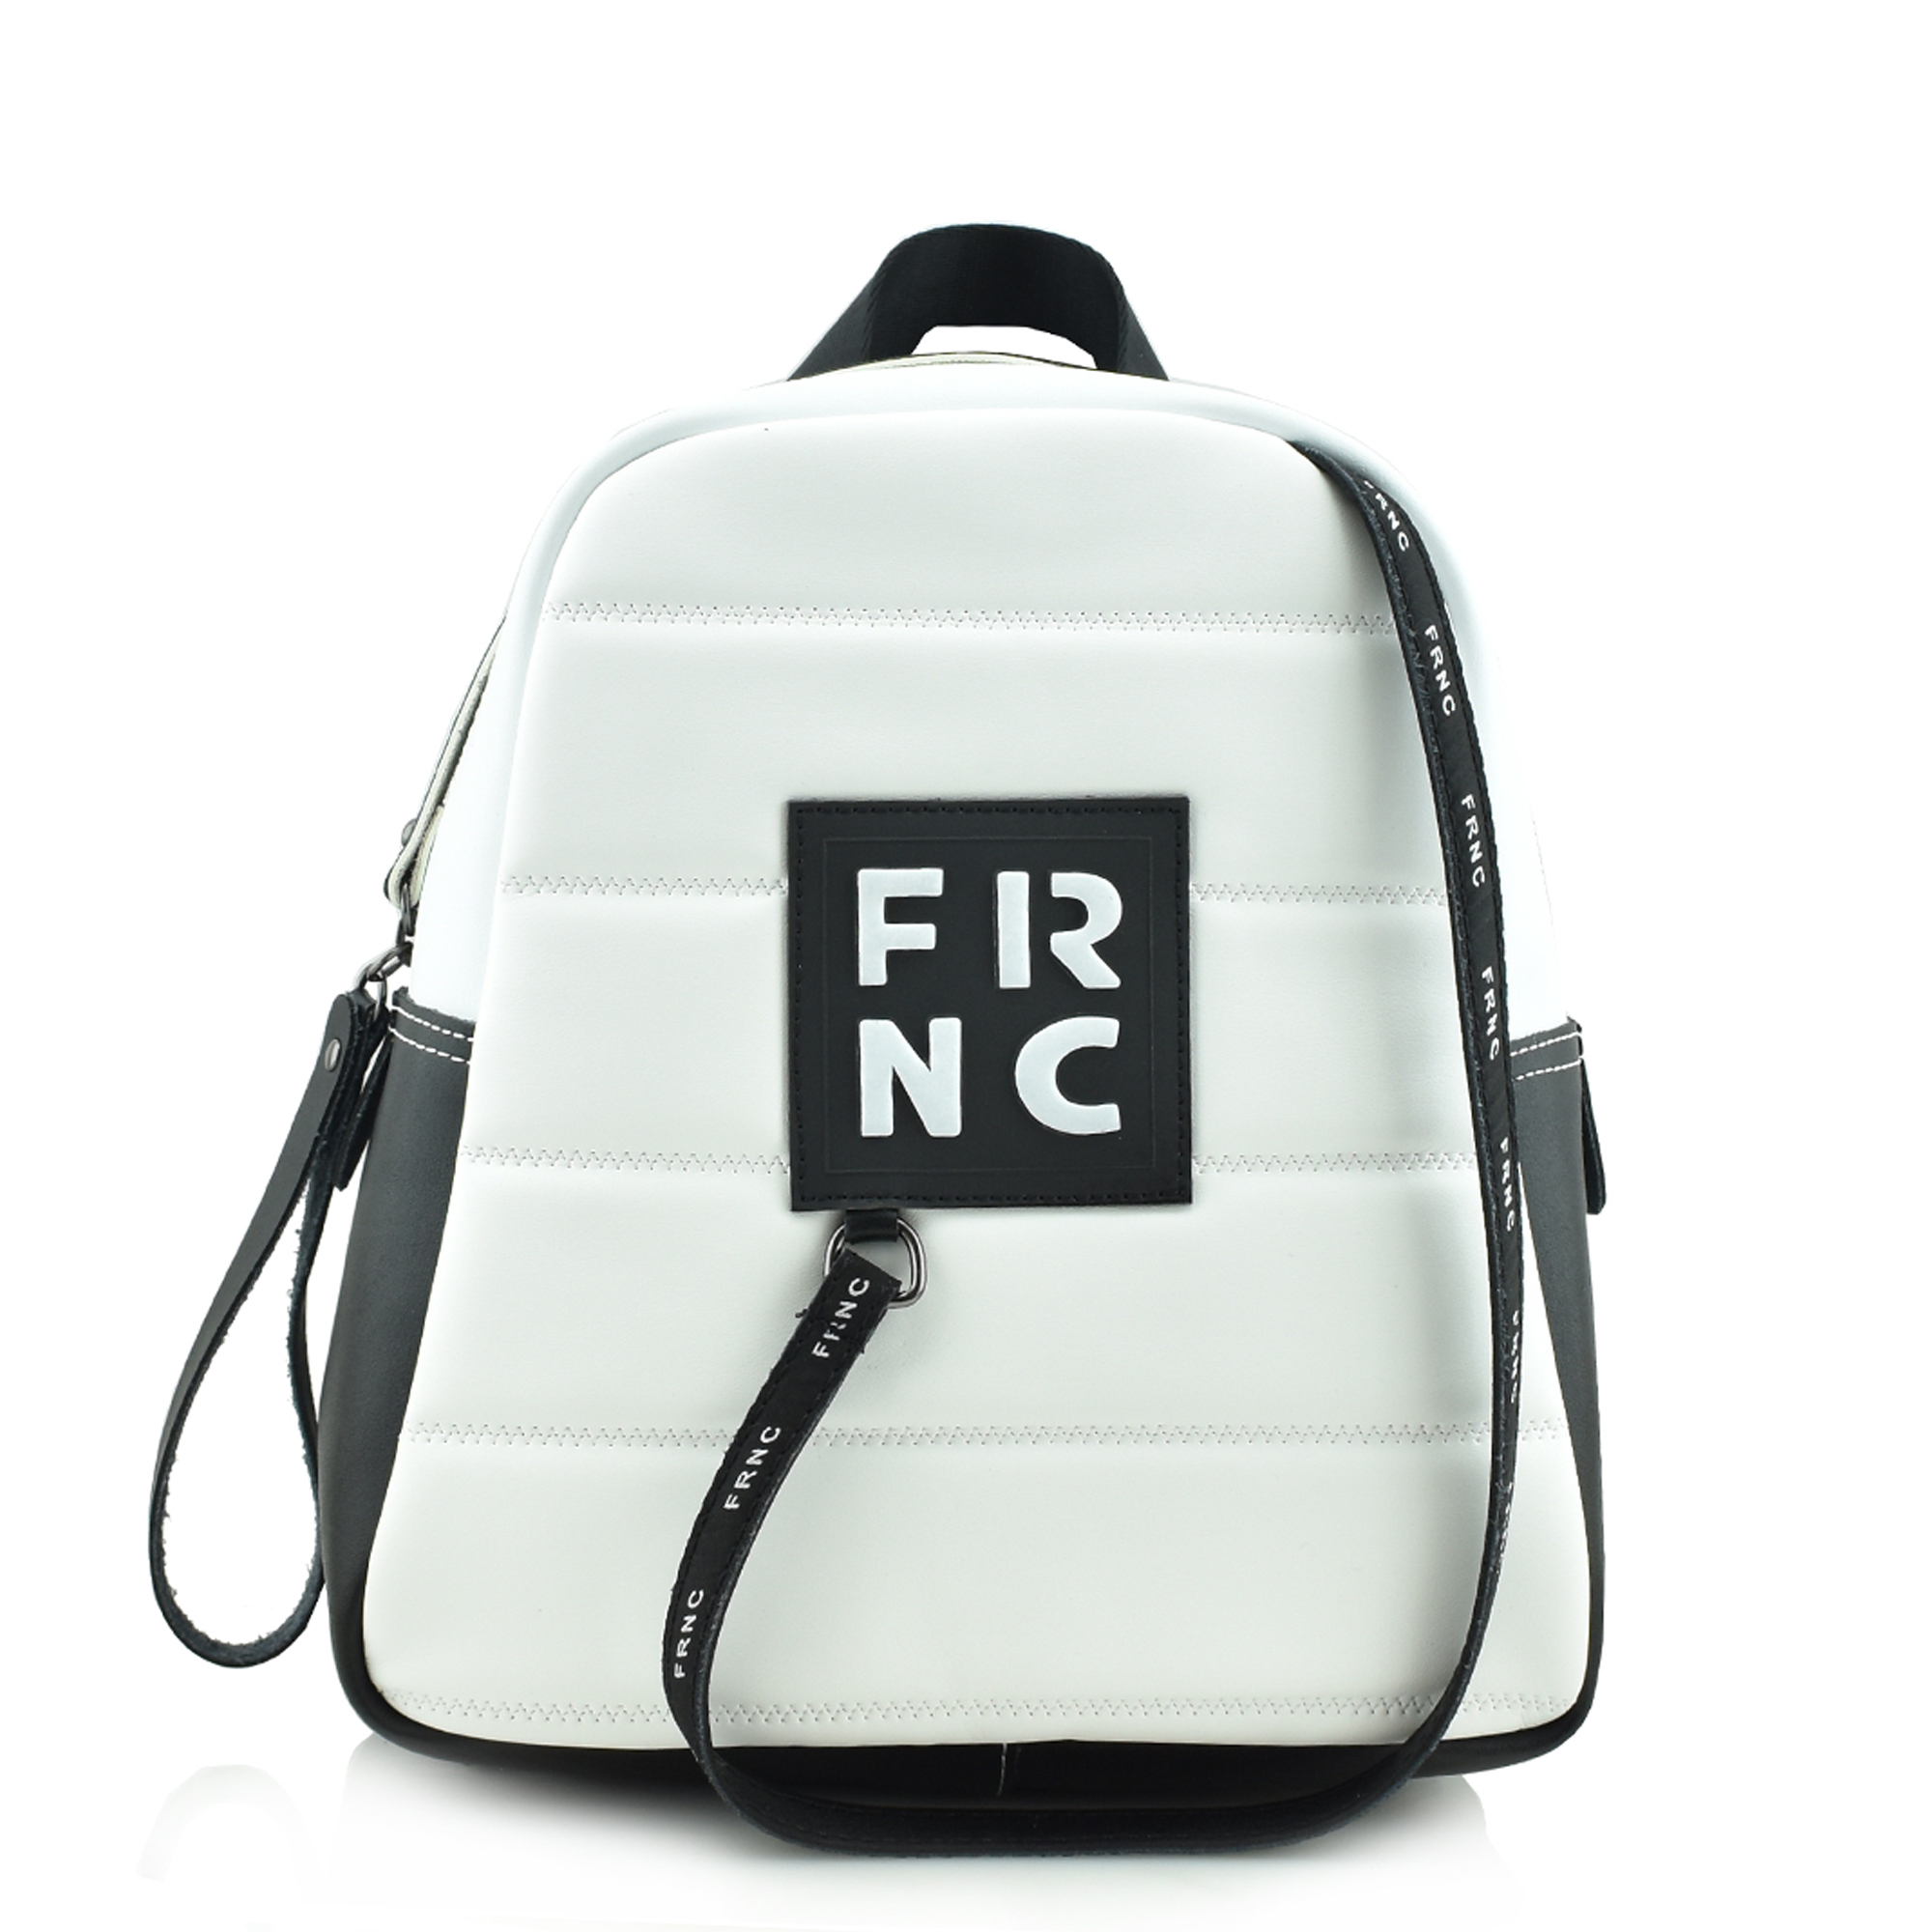 FRNC - FRANCESCO CLASSIC DOUBLE COLOR BACKPACK - 2132 WHITE